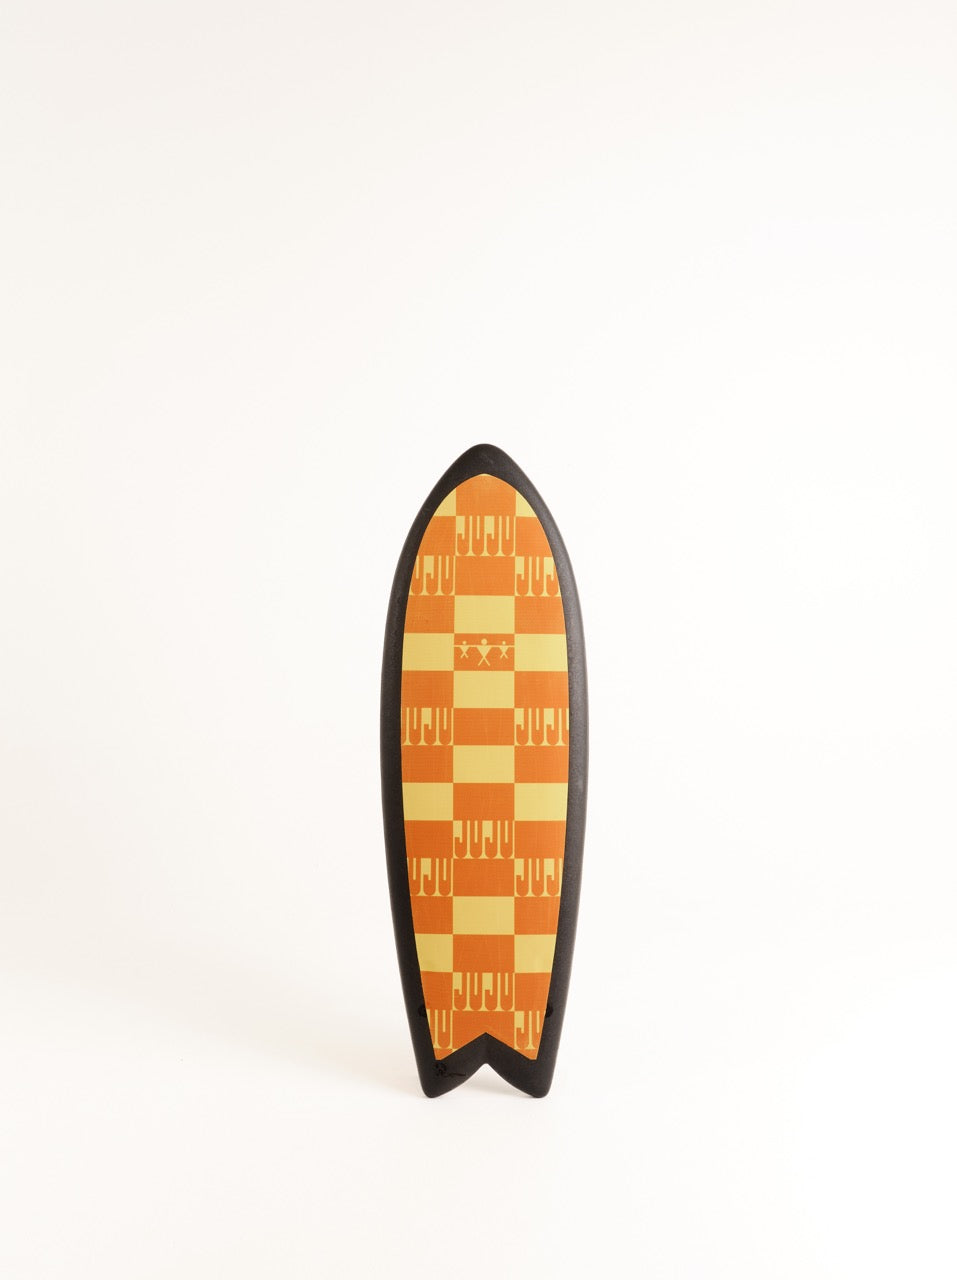 A light yellow and orange chequered 5 foot 3 inch Positive Vibe Warriors Thrill surfboard on a white background